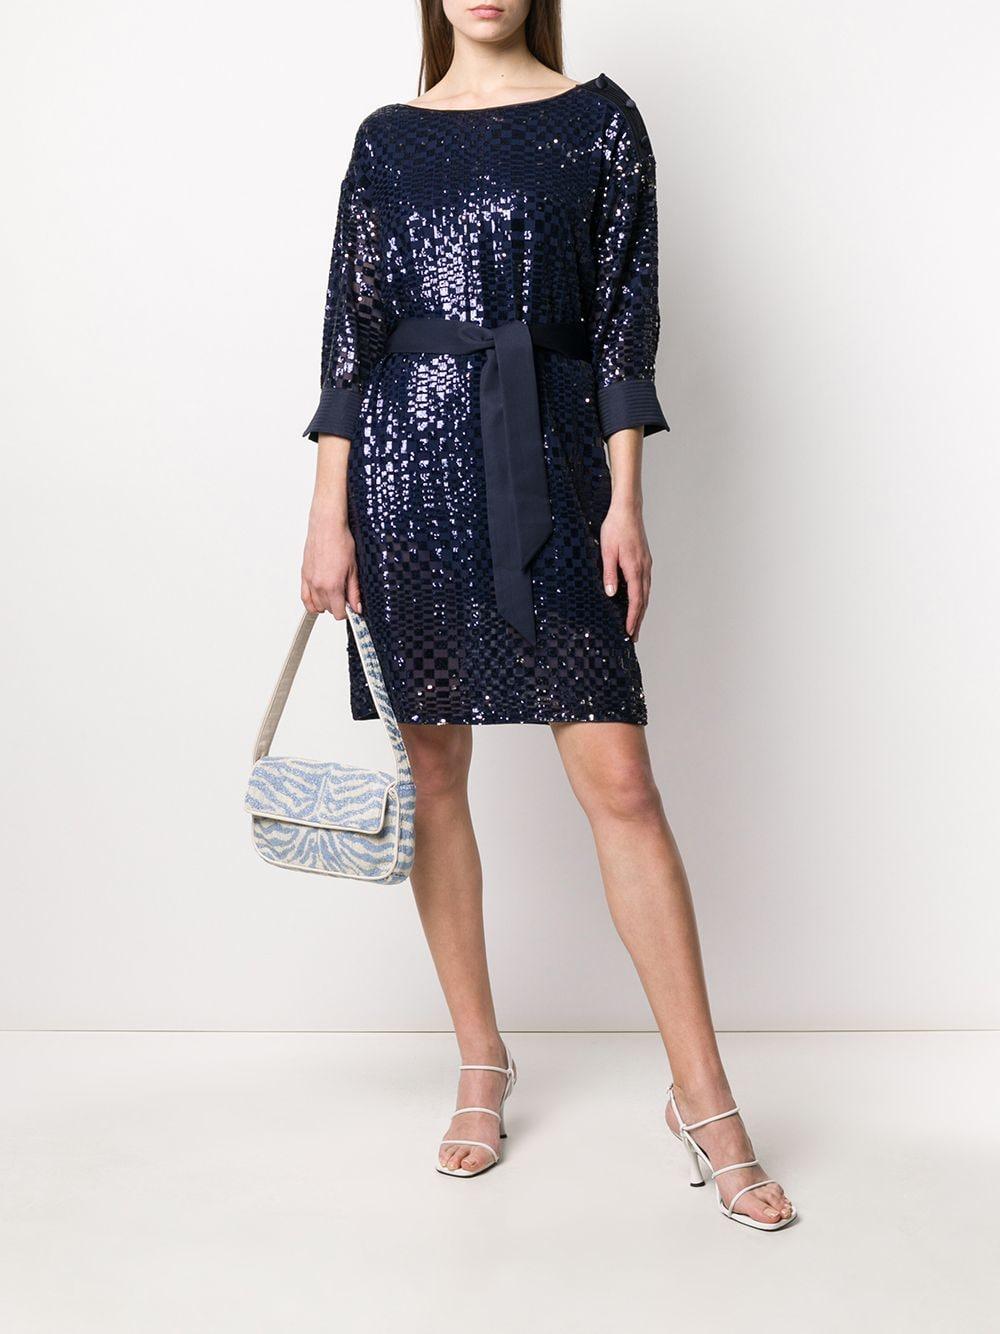 Emporio Armani Synthetic Sequin Embroidered Tie Waist Dress in Blue - Lyst